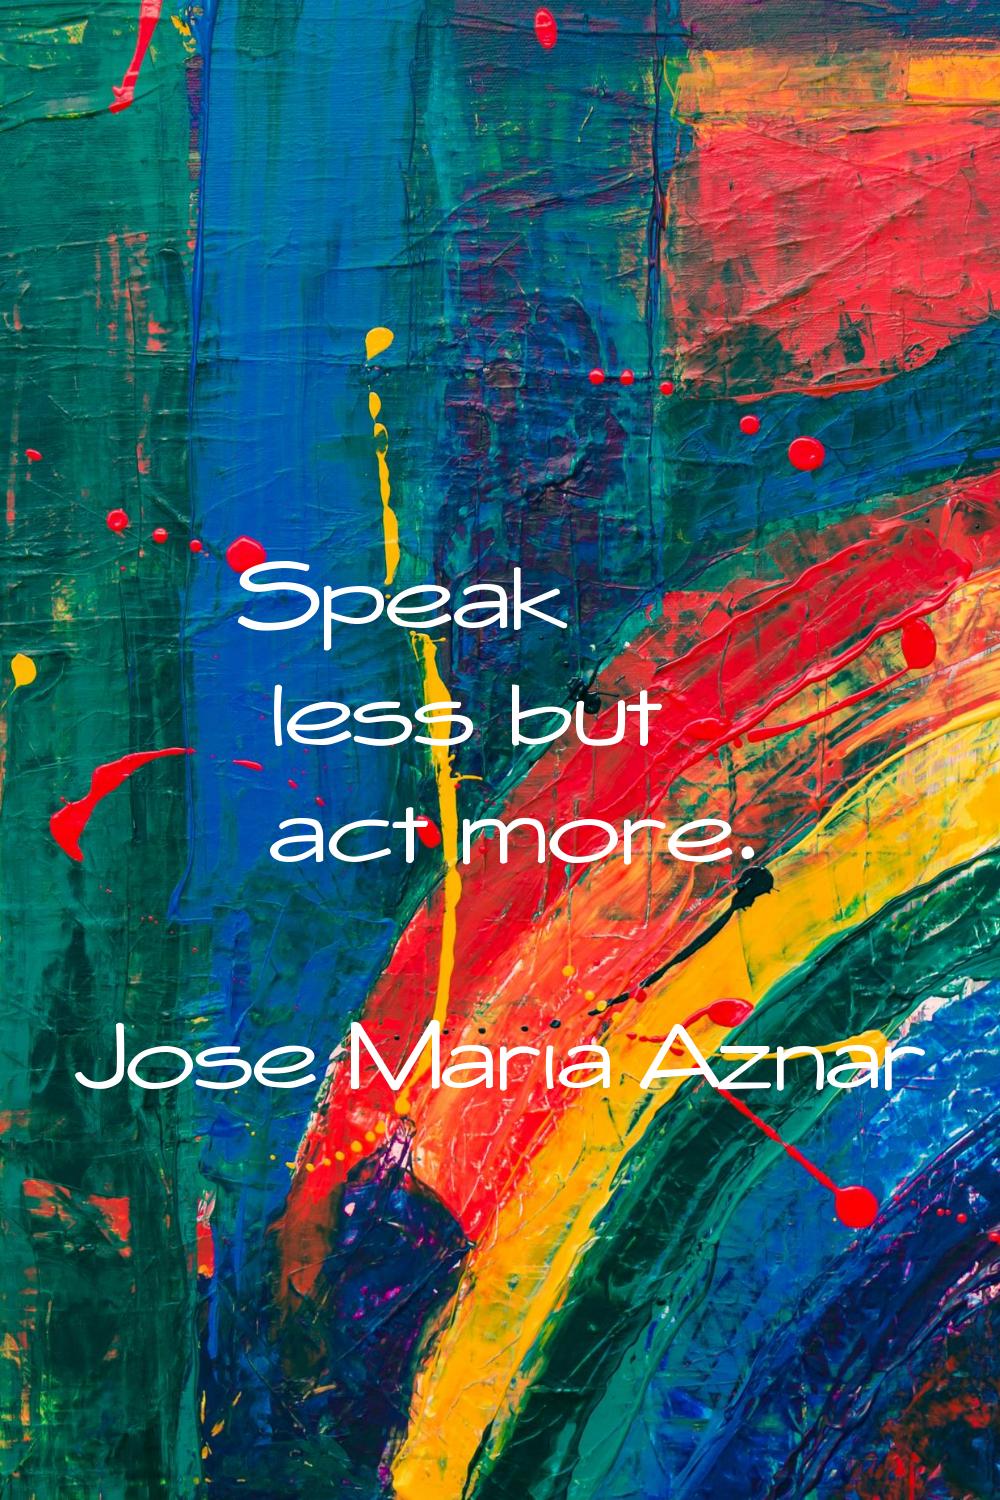 Speak less but act more.